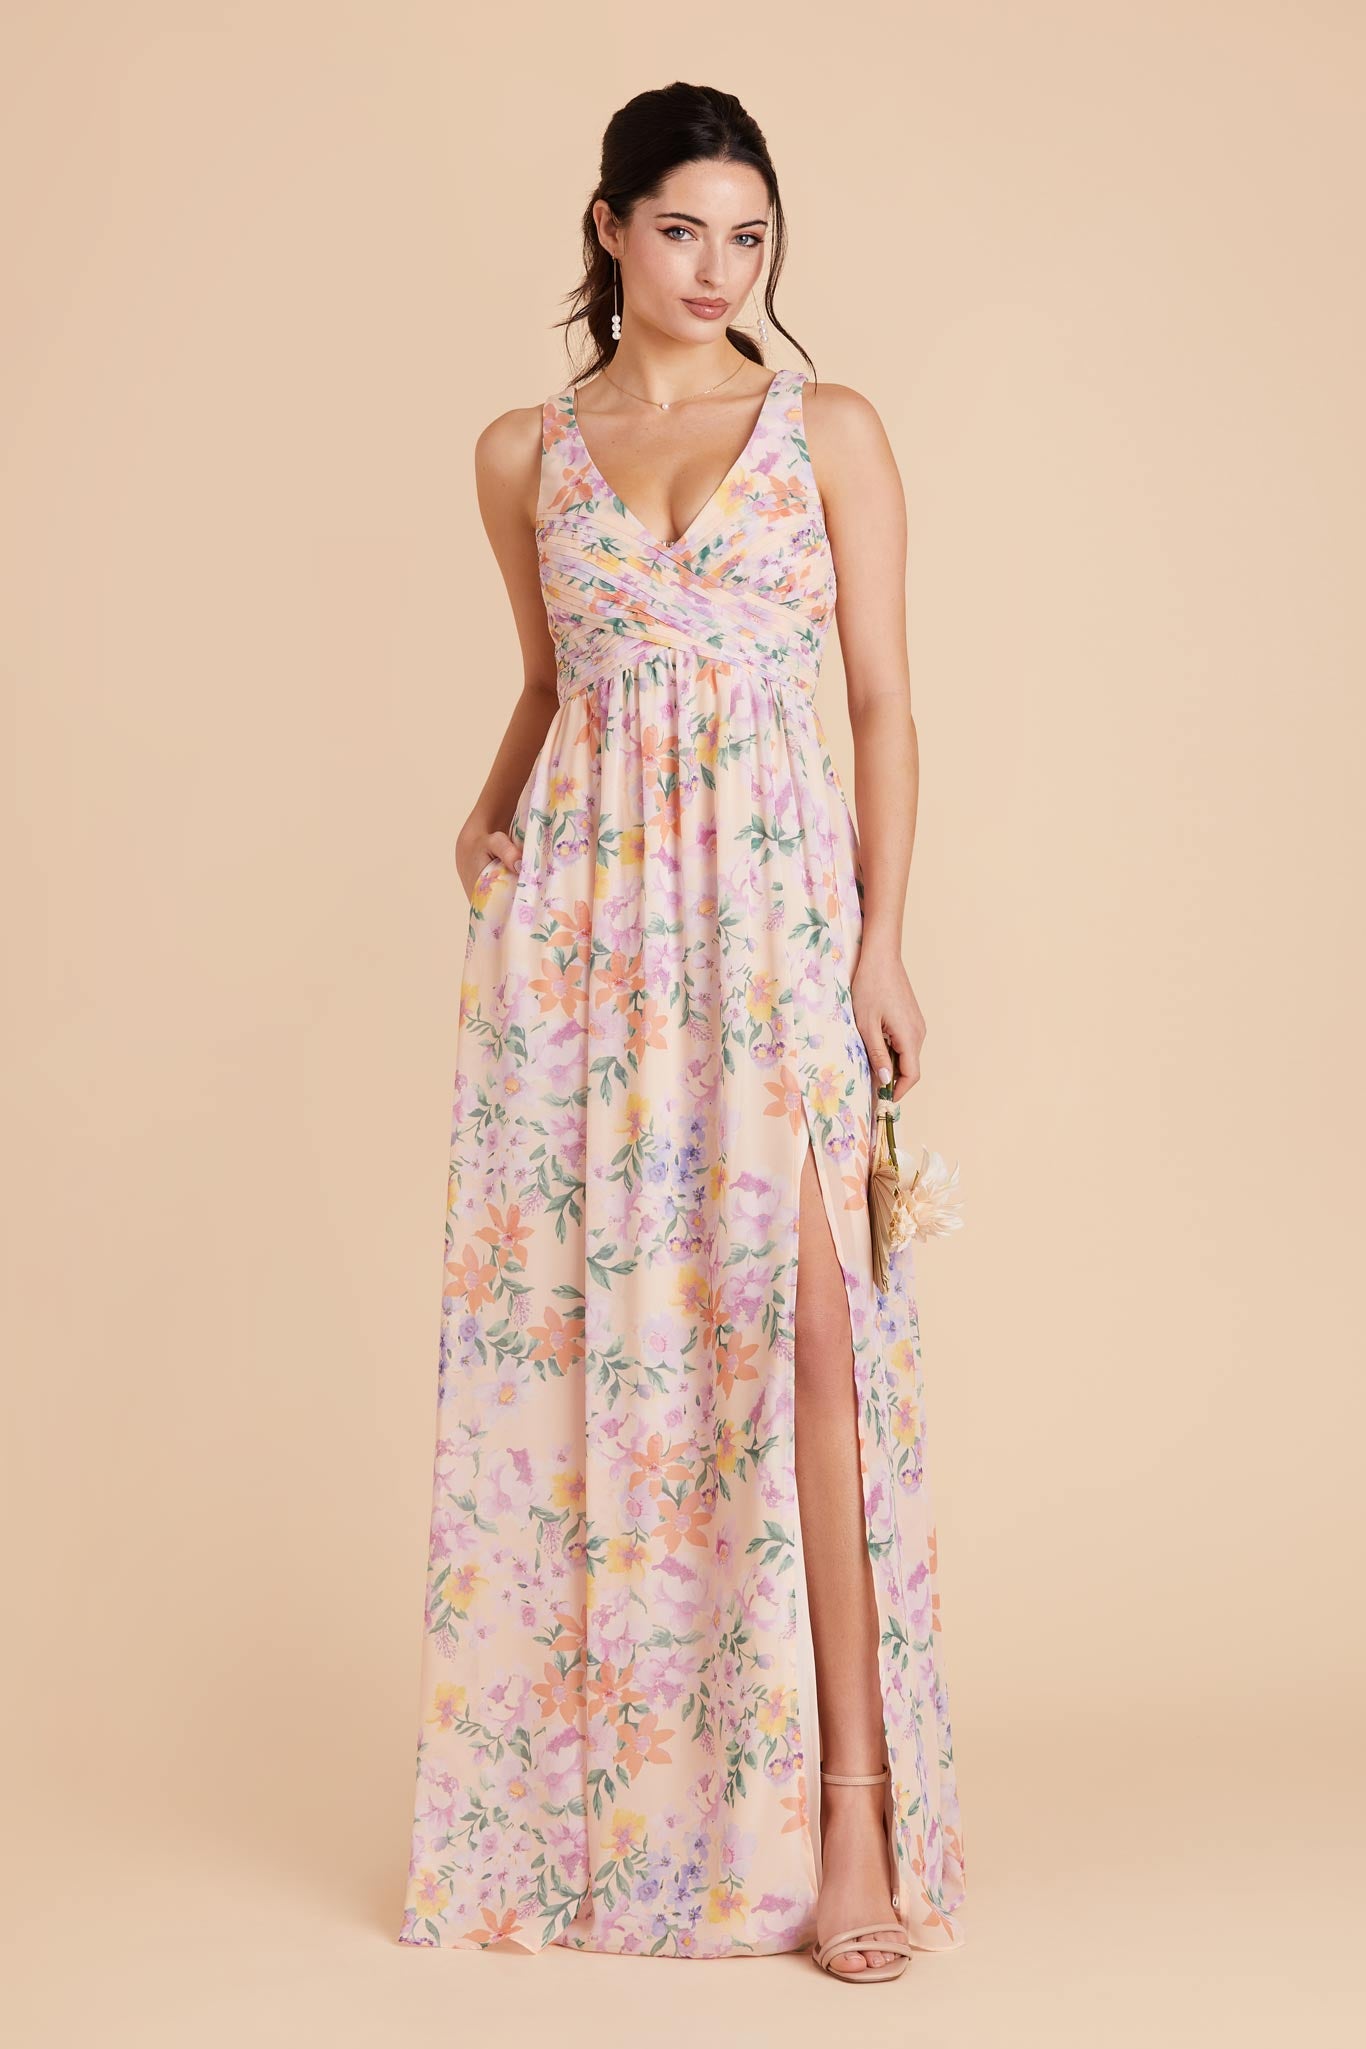 Botanical Blooms Laurie Empire Dress by Birdy Grey